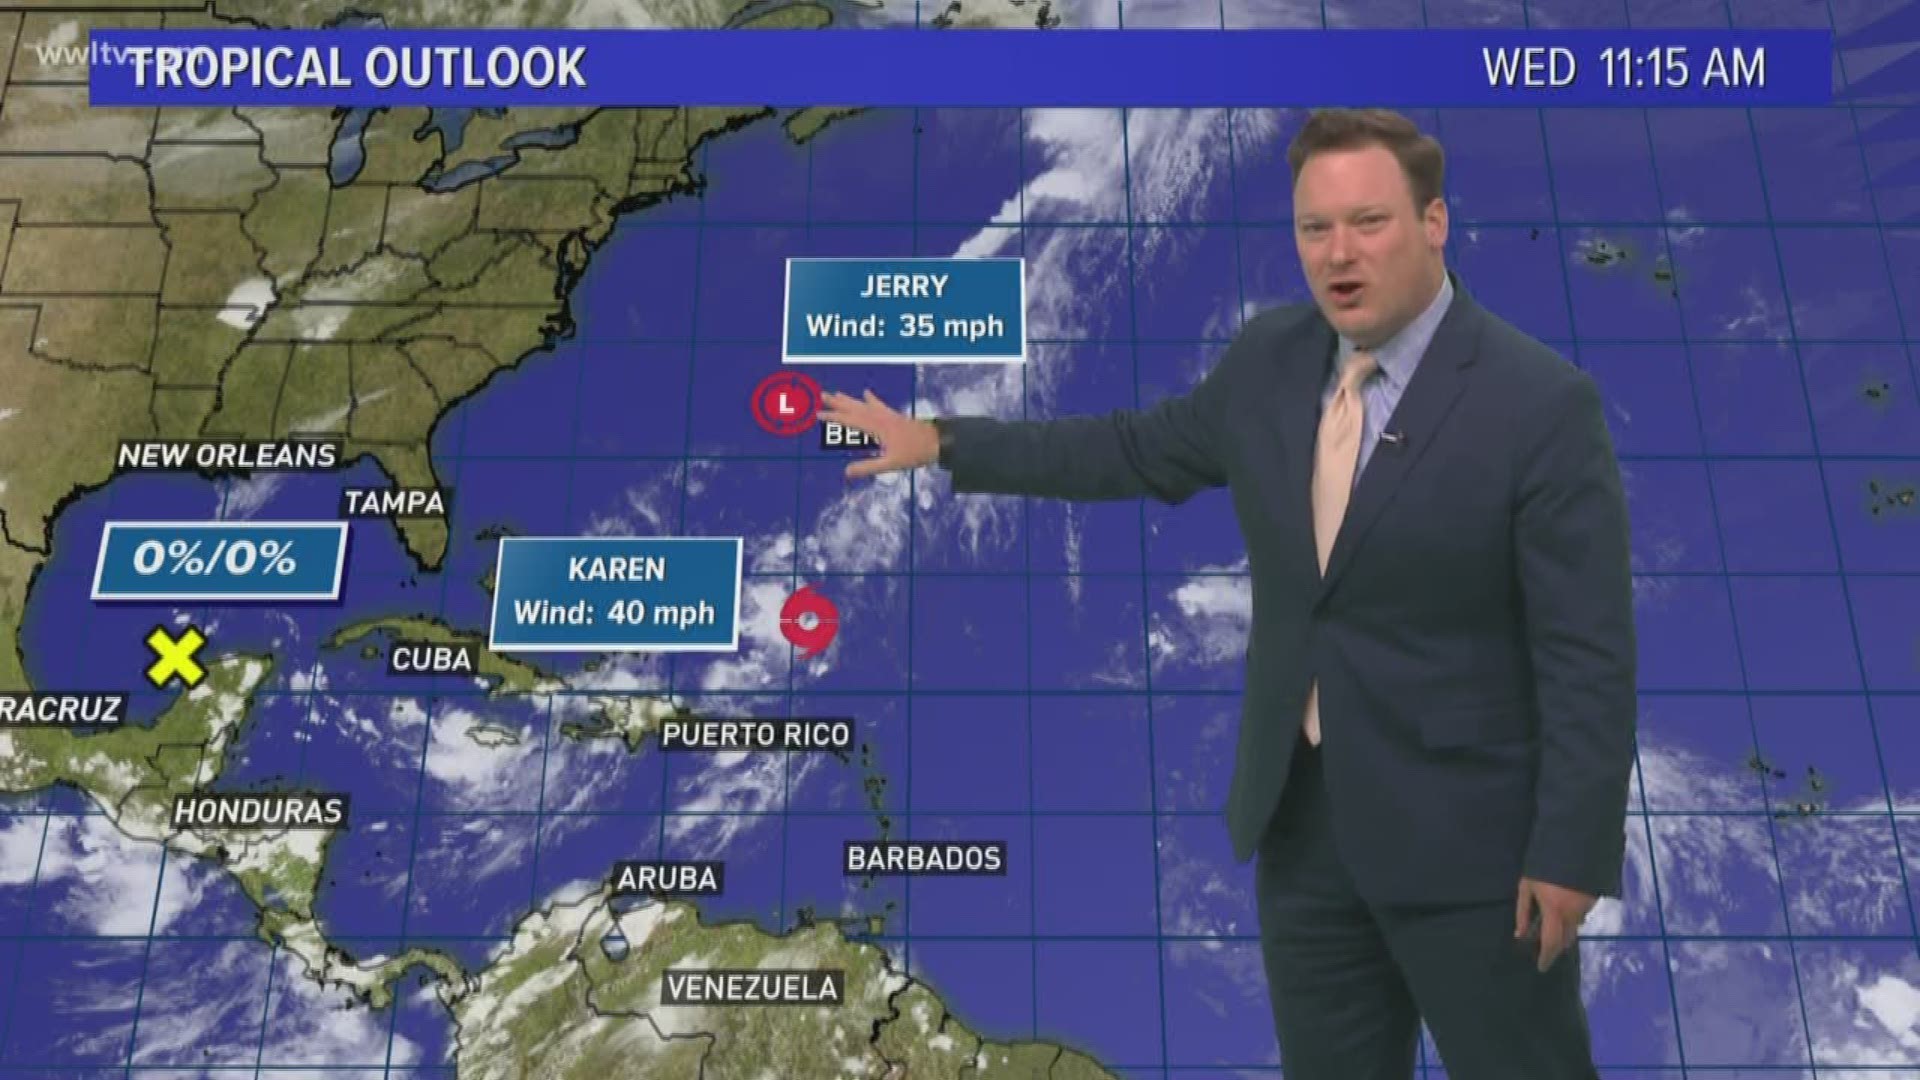 Meteorologist Chris Franklin has a look at the systems in the tropics, including Tropical Storm Karen and where it may go.